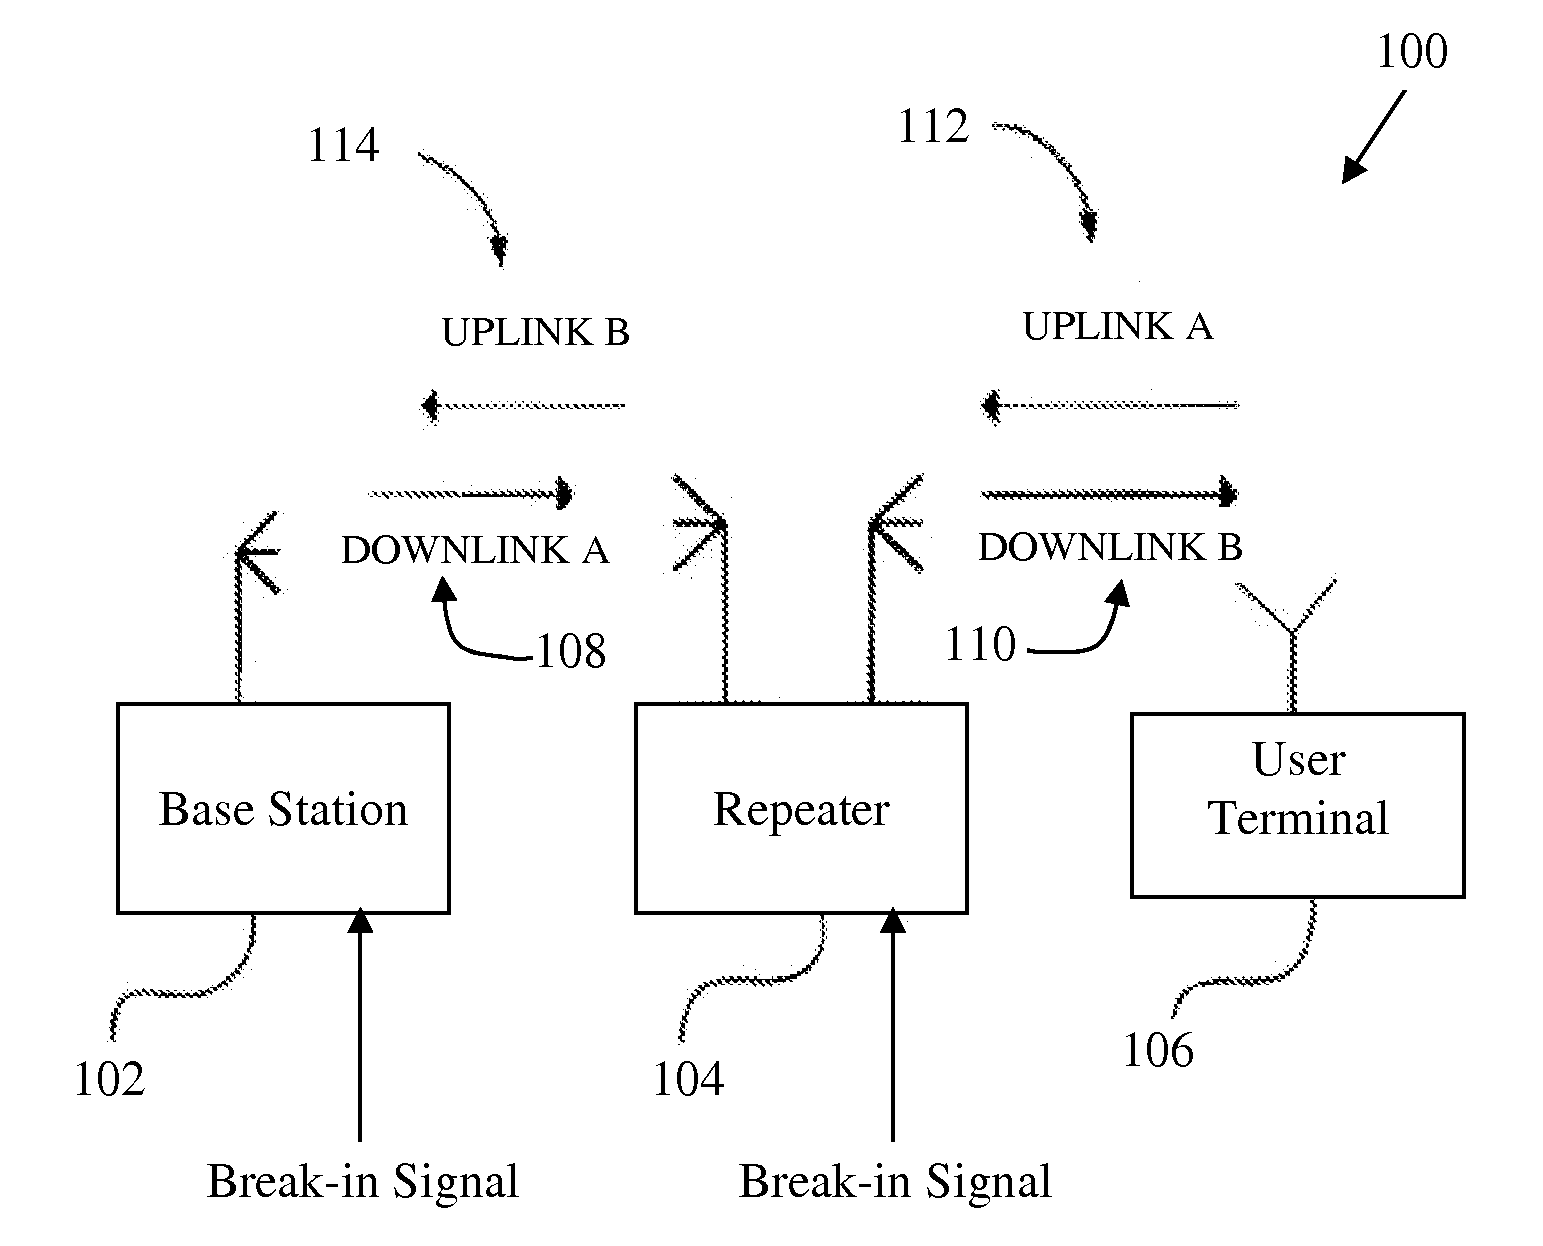 System and method for inserting break-in signals in communication systems